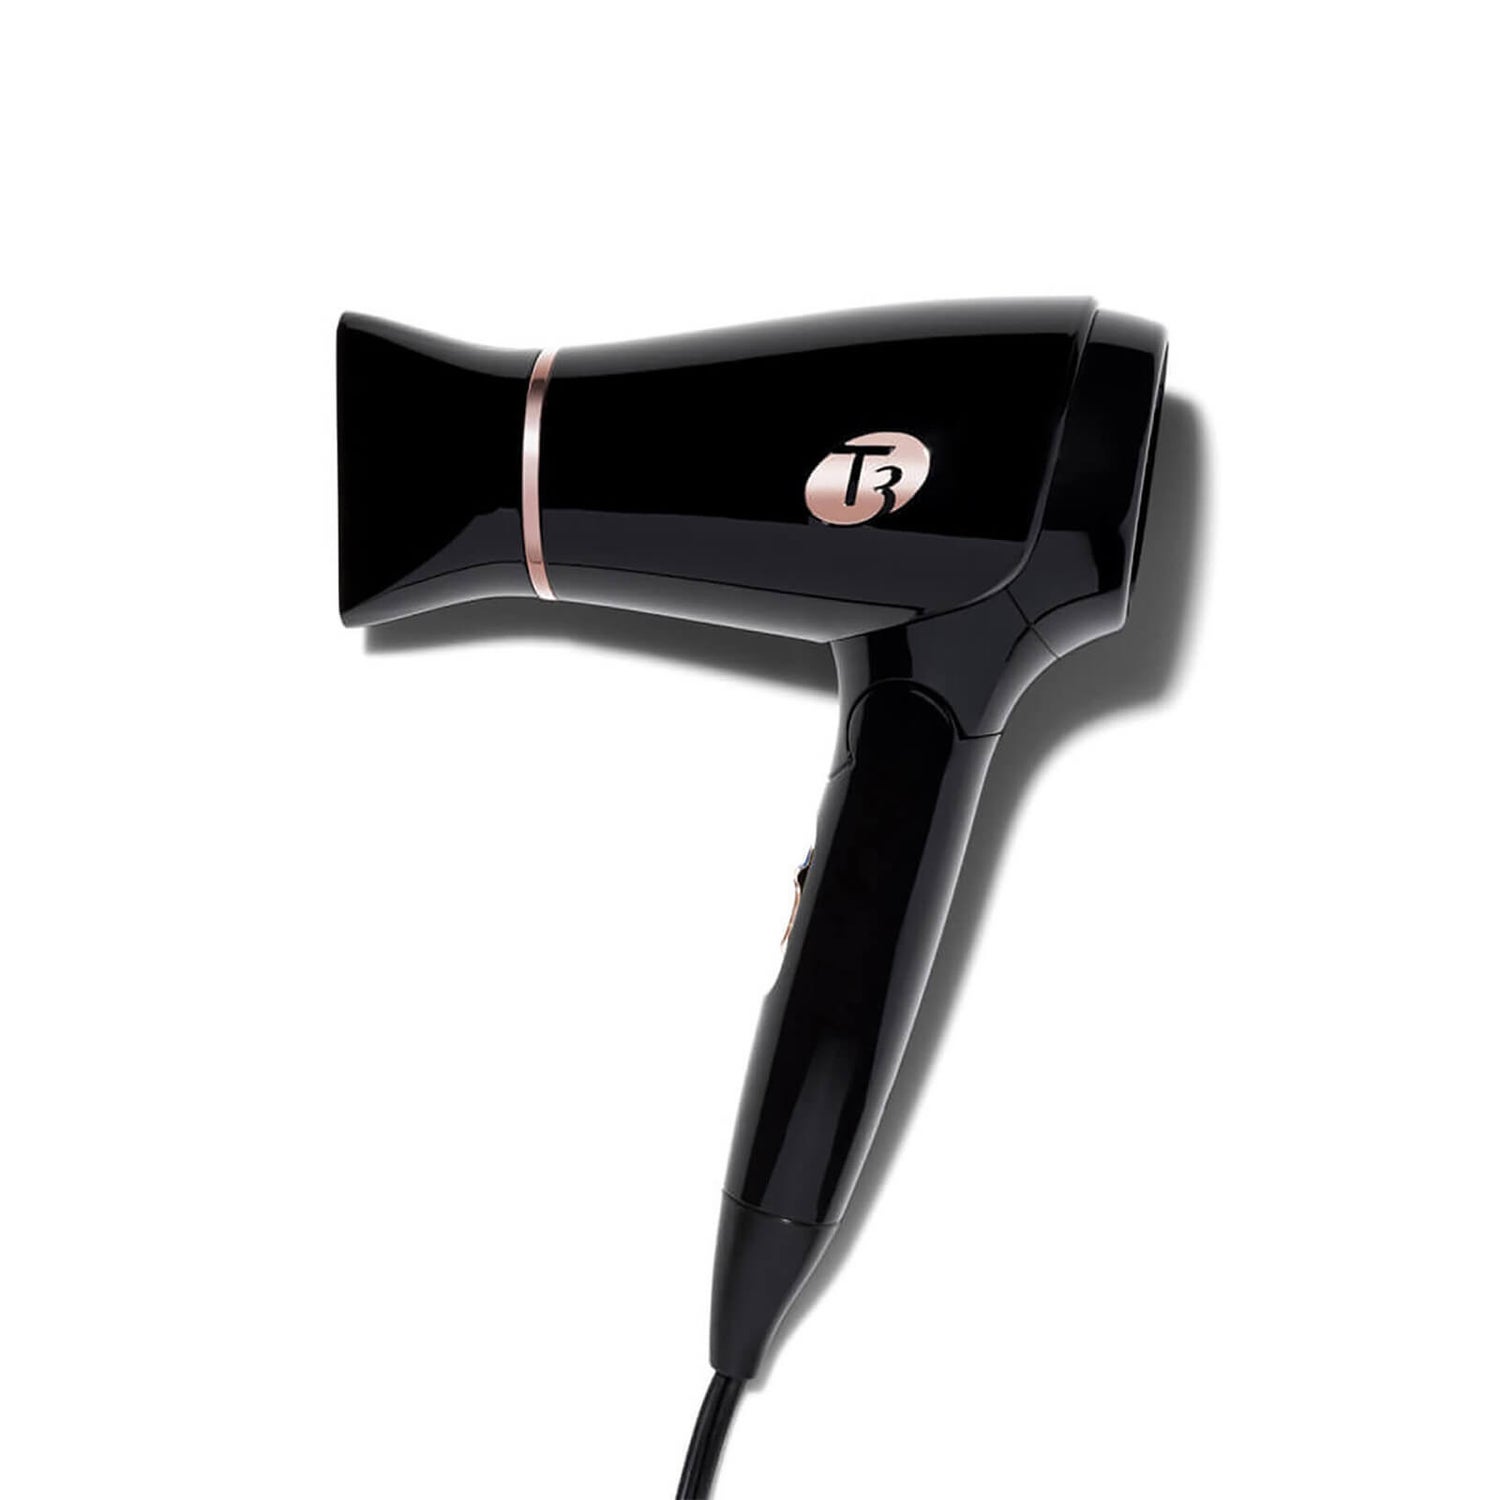 T3 Featherweight Compact Folding Hair Dryer with Dual Voltage - Black/Rose Gold (3 piece)